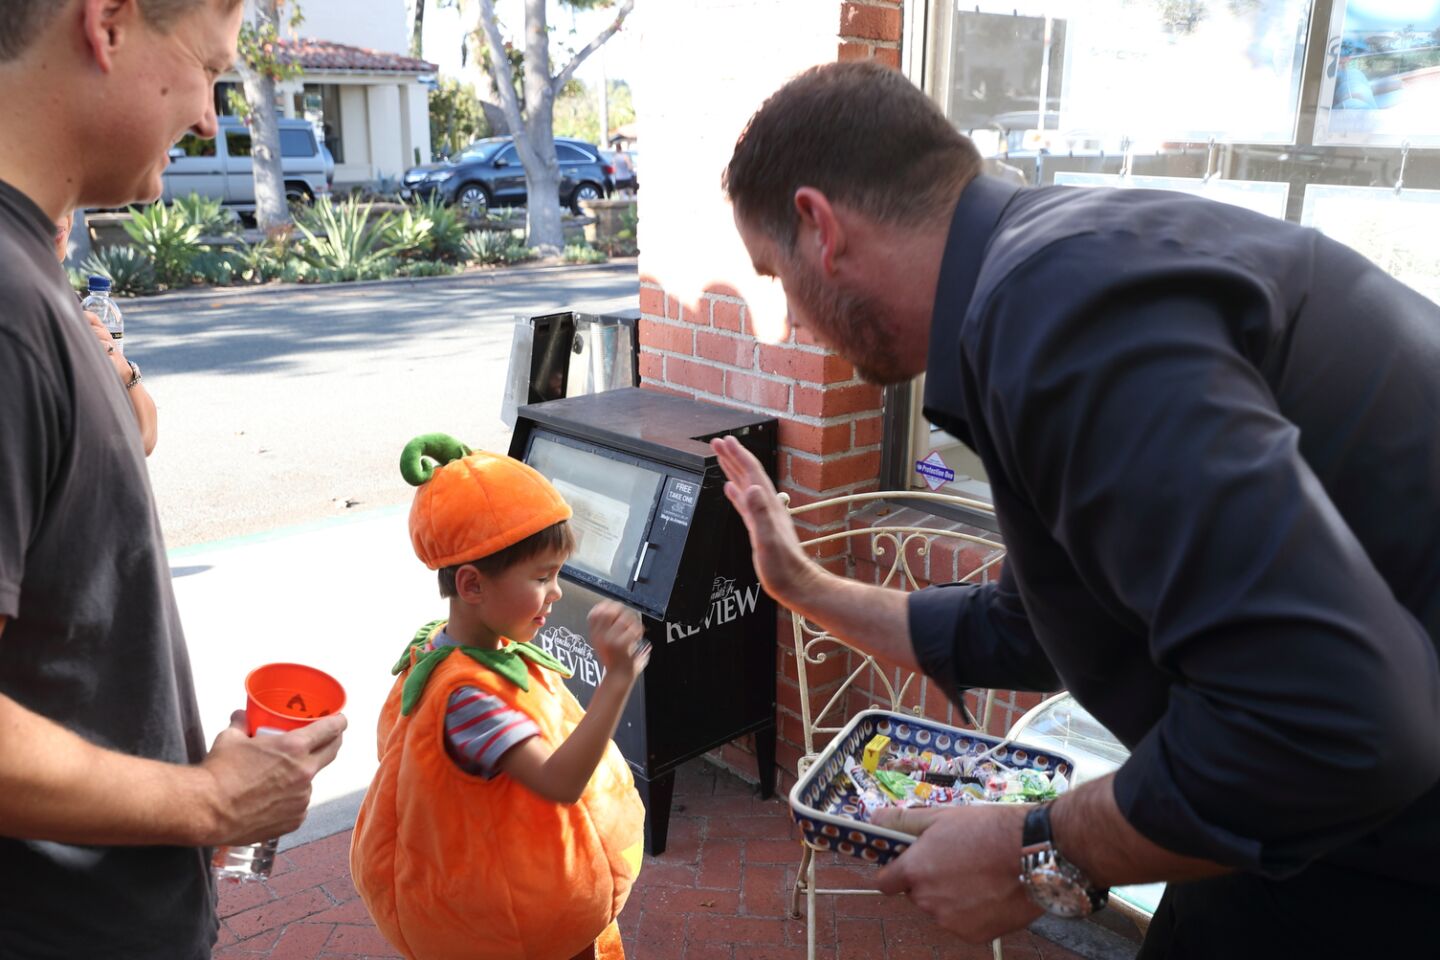 Jake Moore stopped to get candy from Matt Palmquist at RSF Escrow